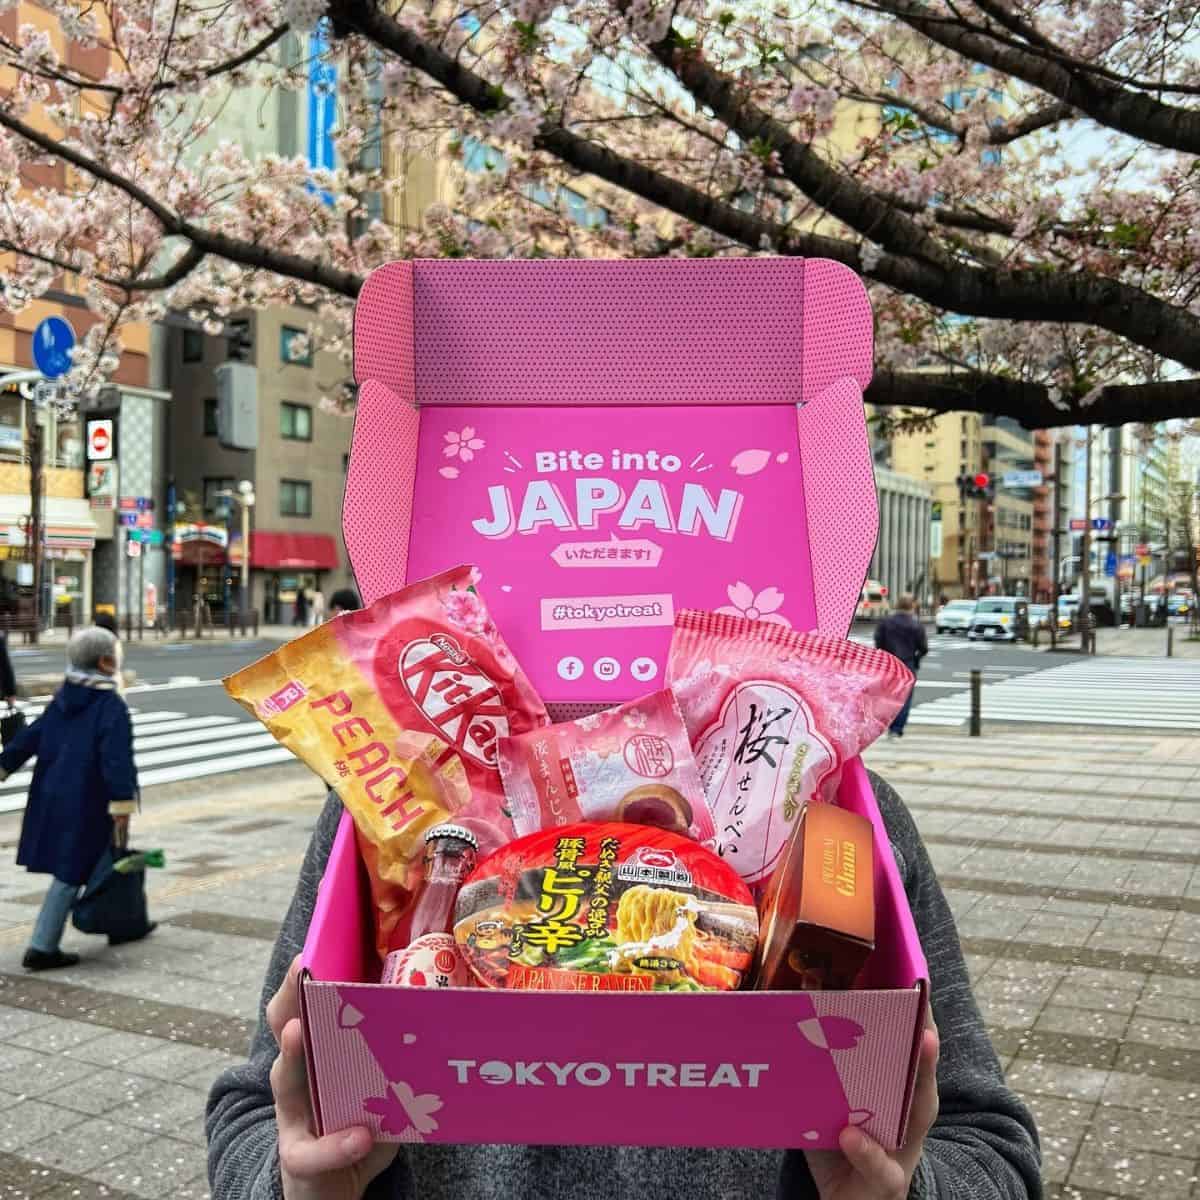 Tokyo Treat in a pink box under the cherry blossom tree